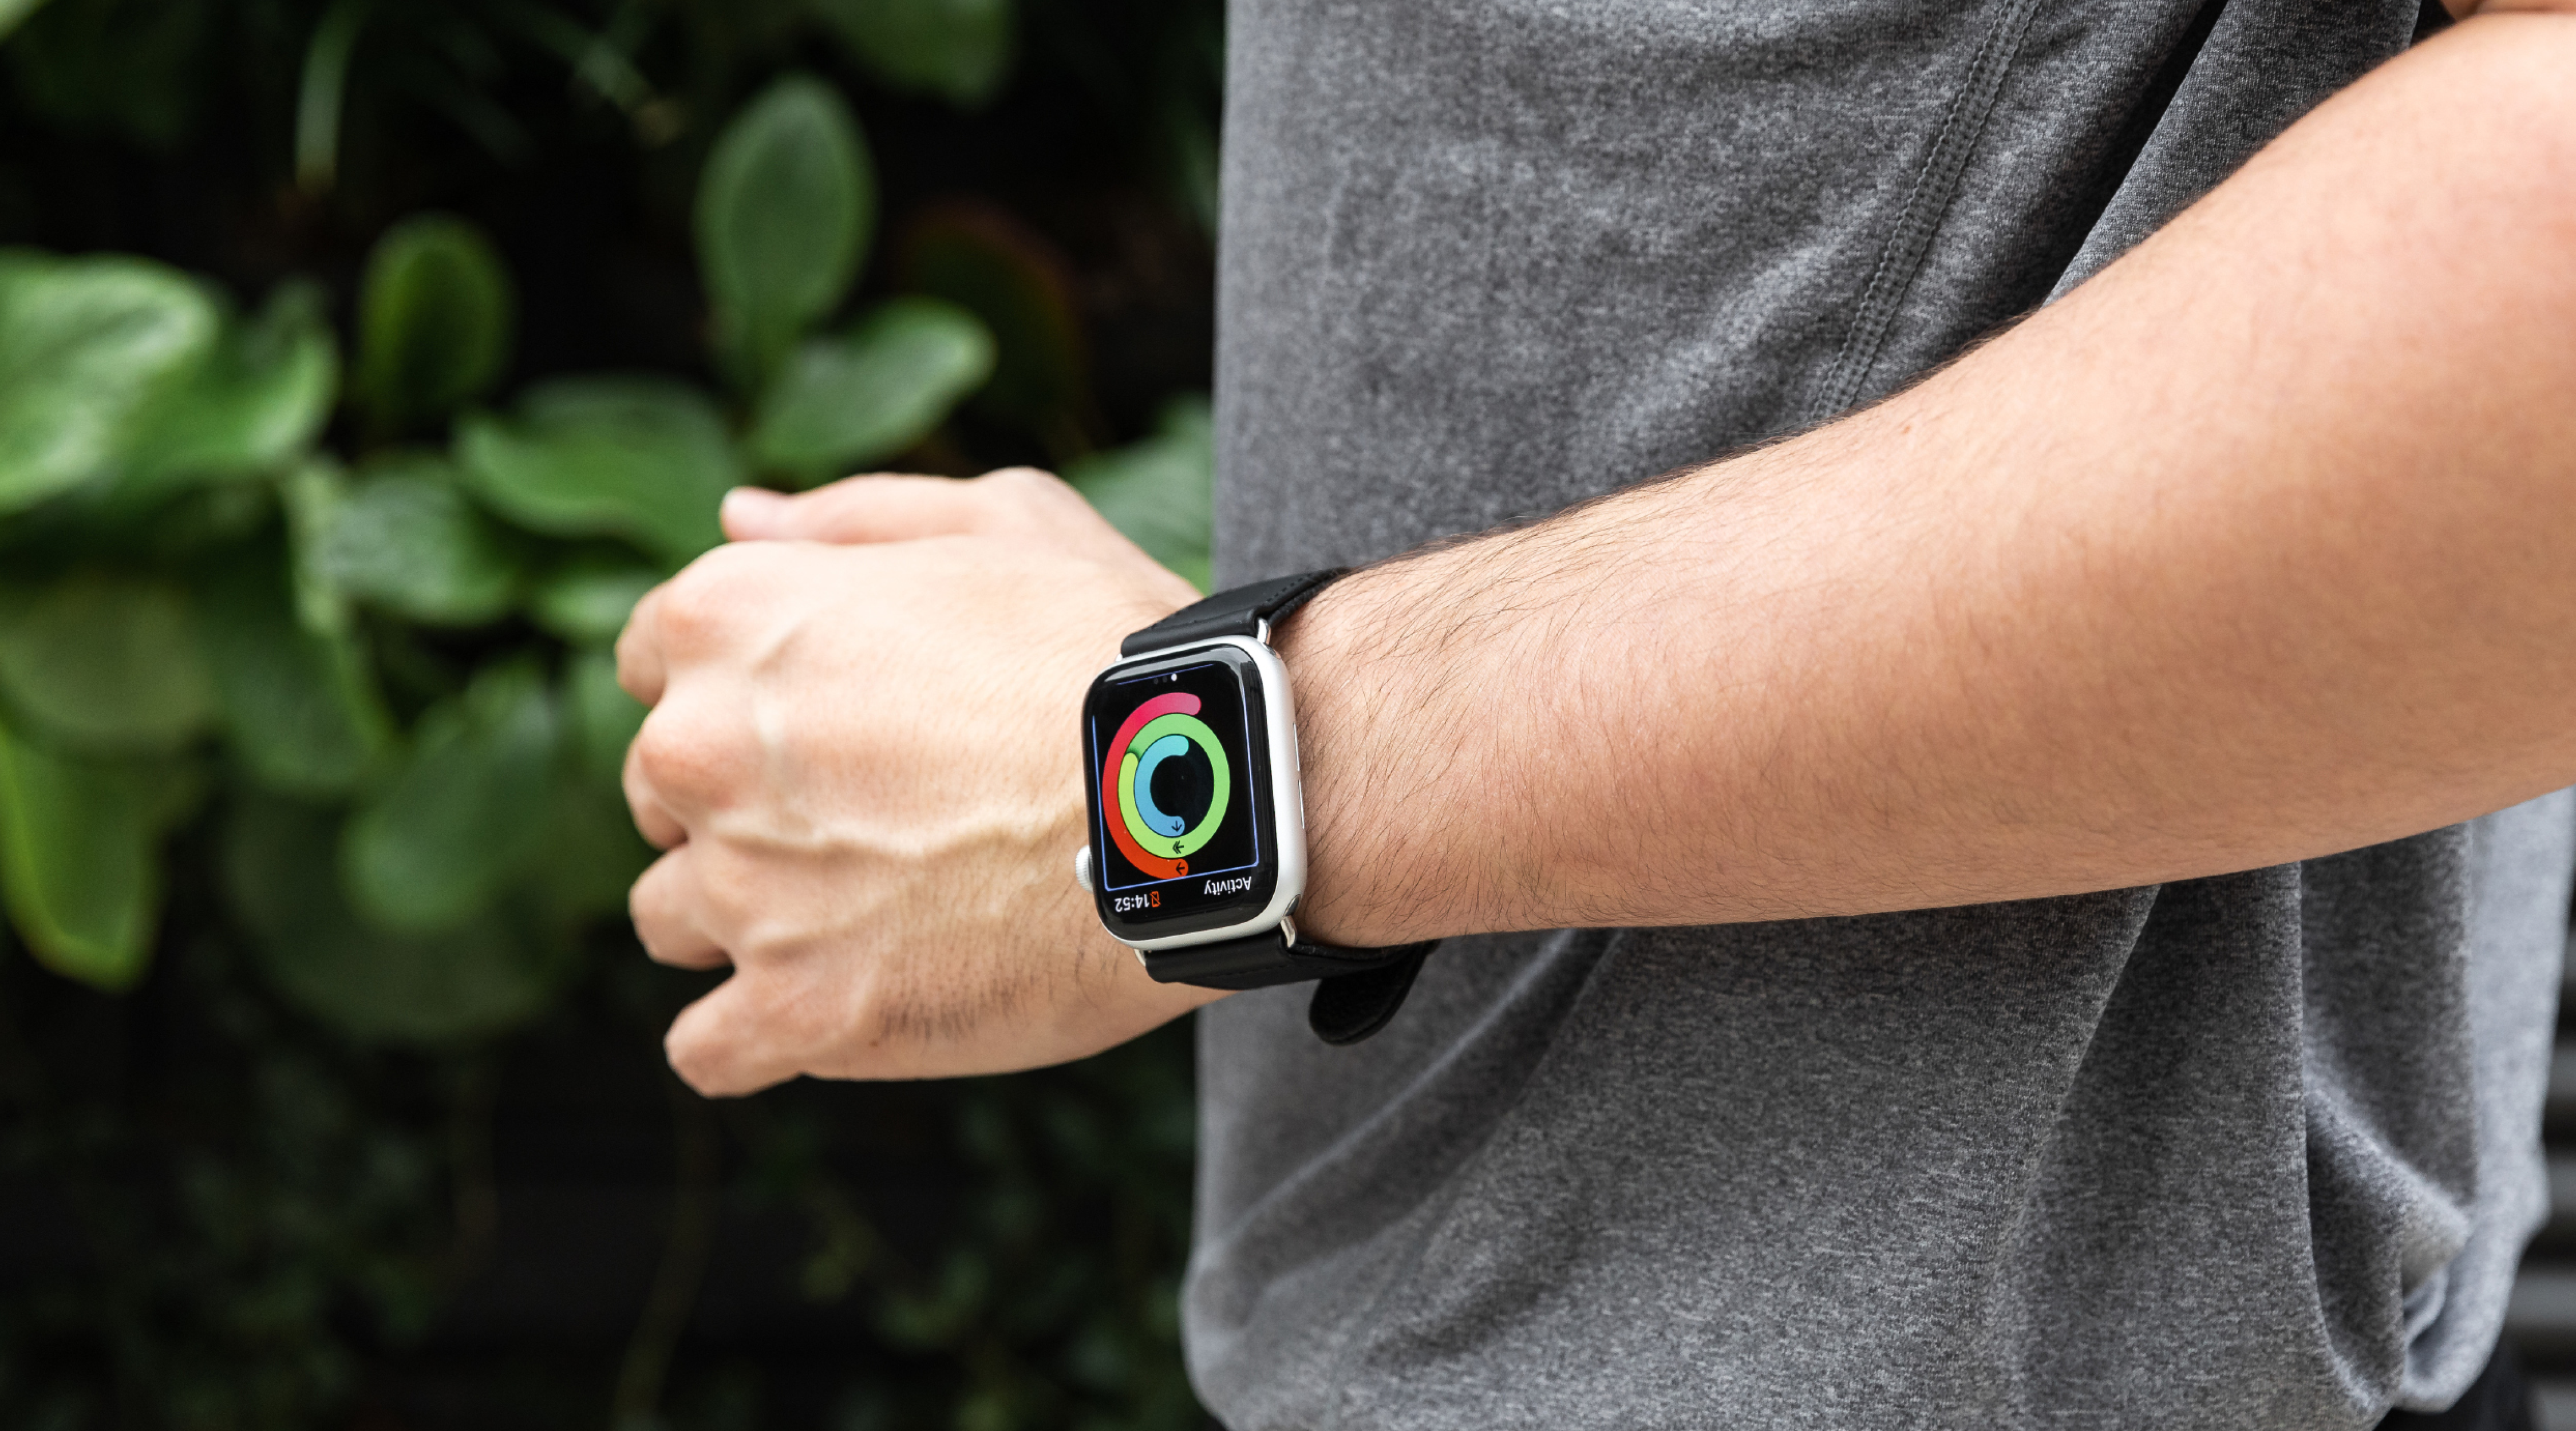 Man wearing a Mous Apple Watch strap doing exercise outside close up